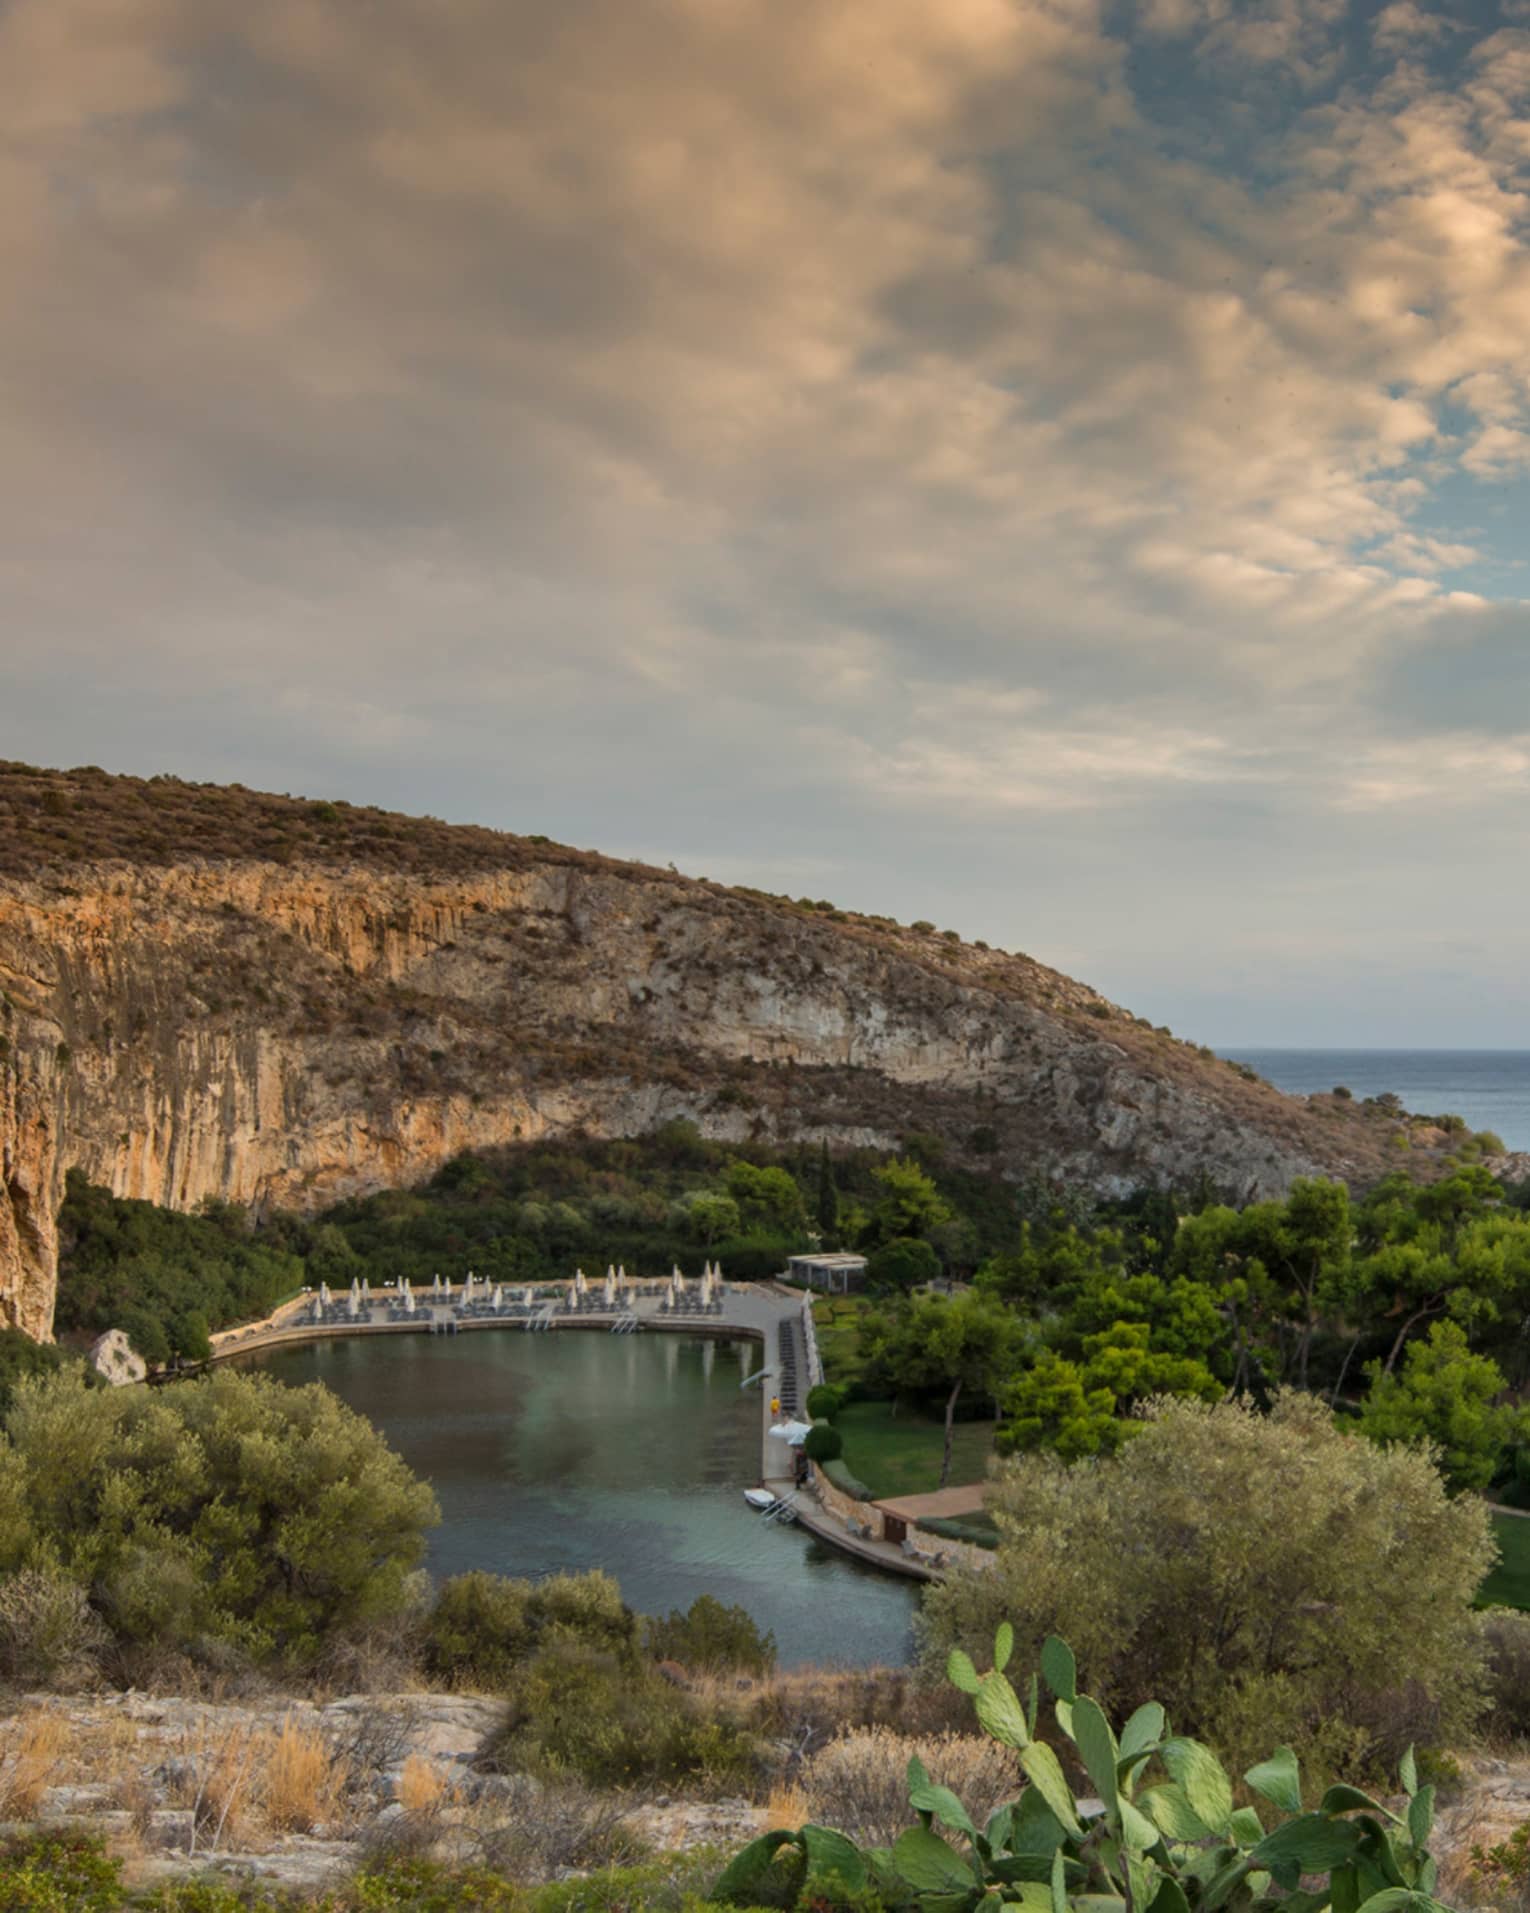 View of Vouliagmeni with rocky hill, green trees and shrubs overlooking ocean